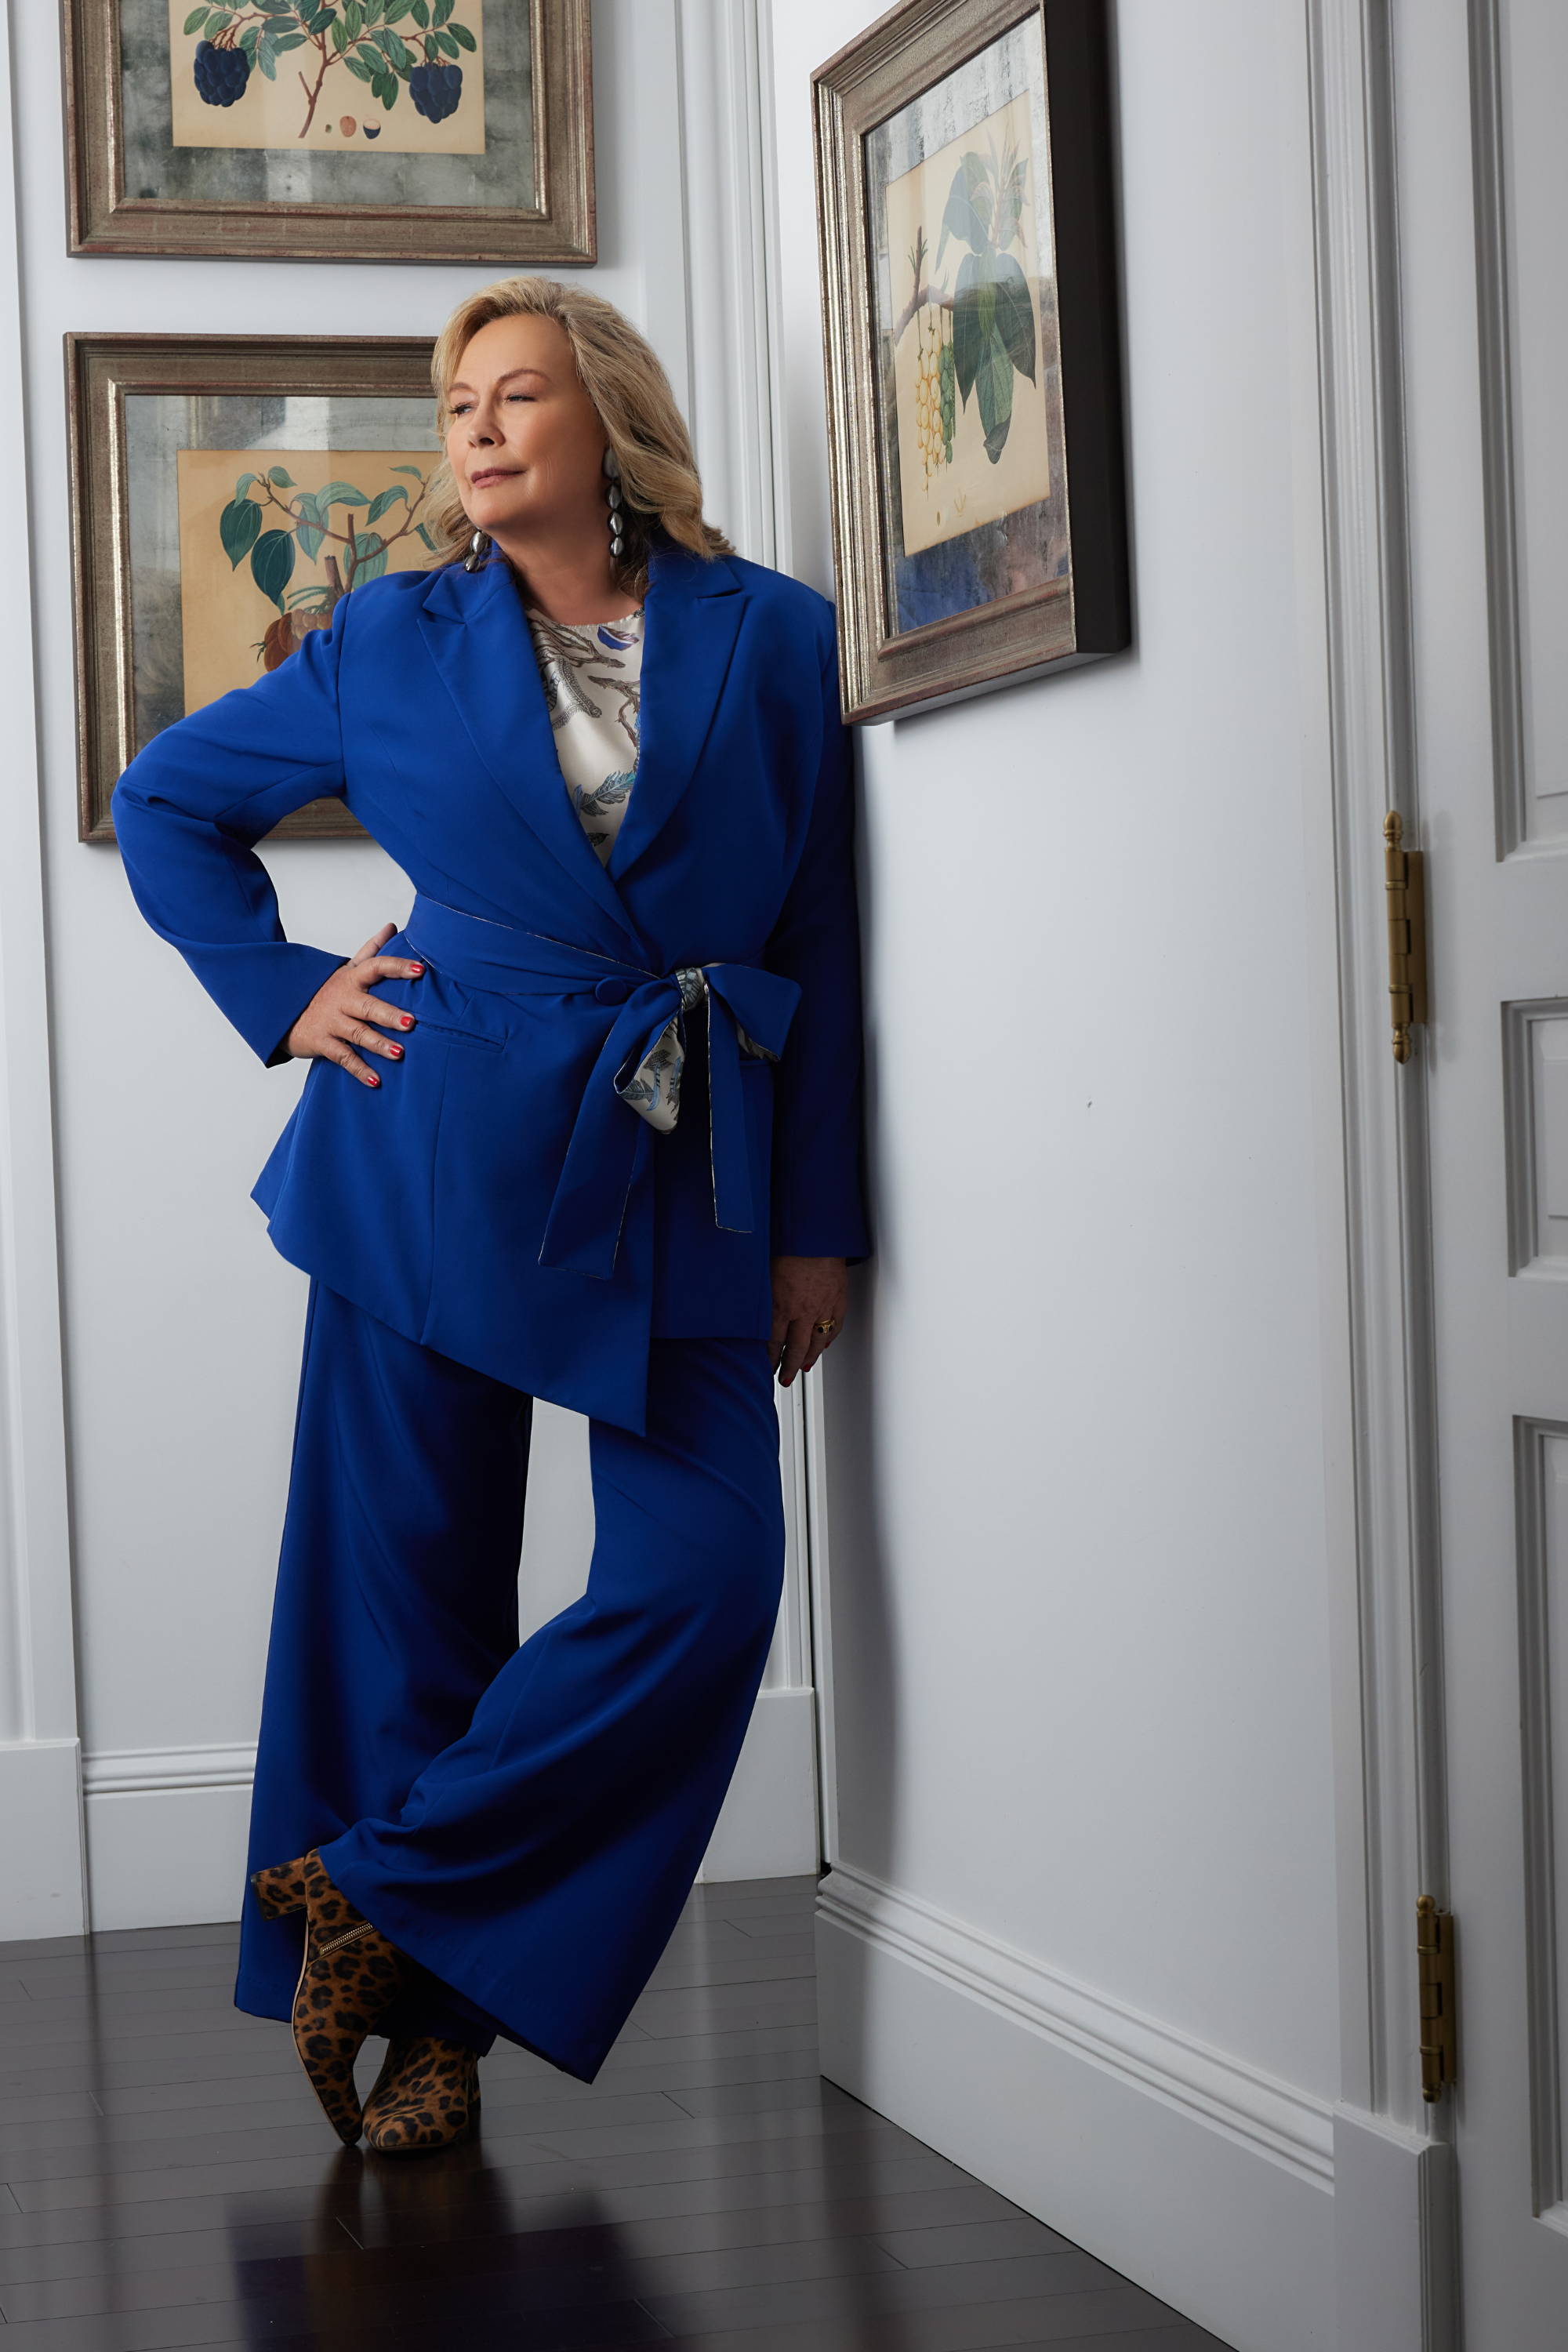 Ala Isham wearing blue silk lined matching suit with fether printed shell tank in New york City by Ala von Auersperg